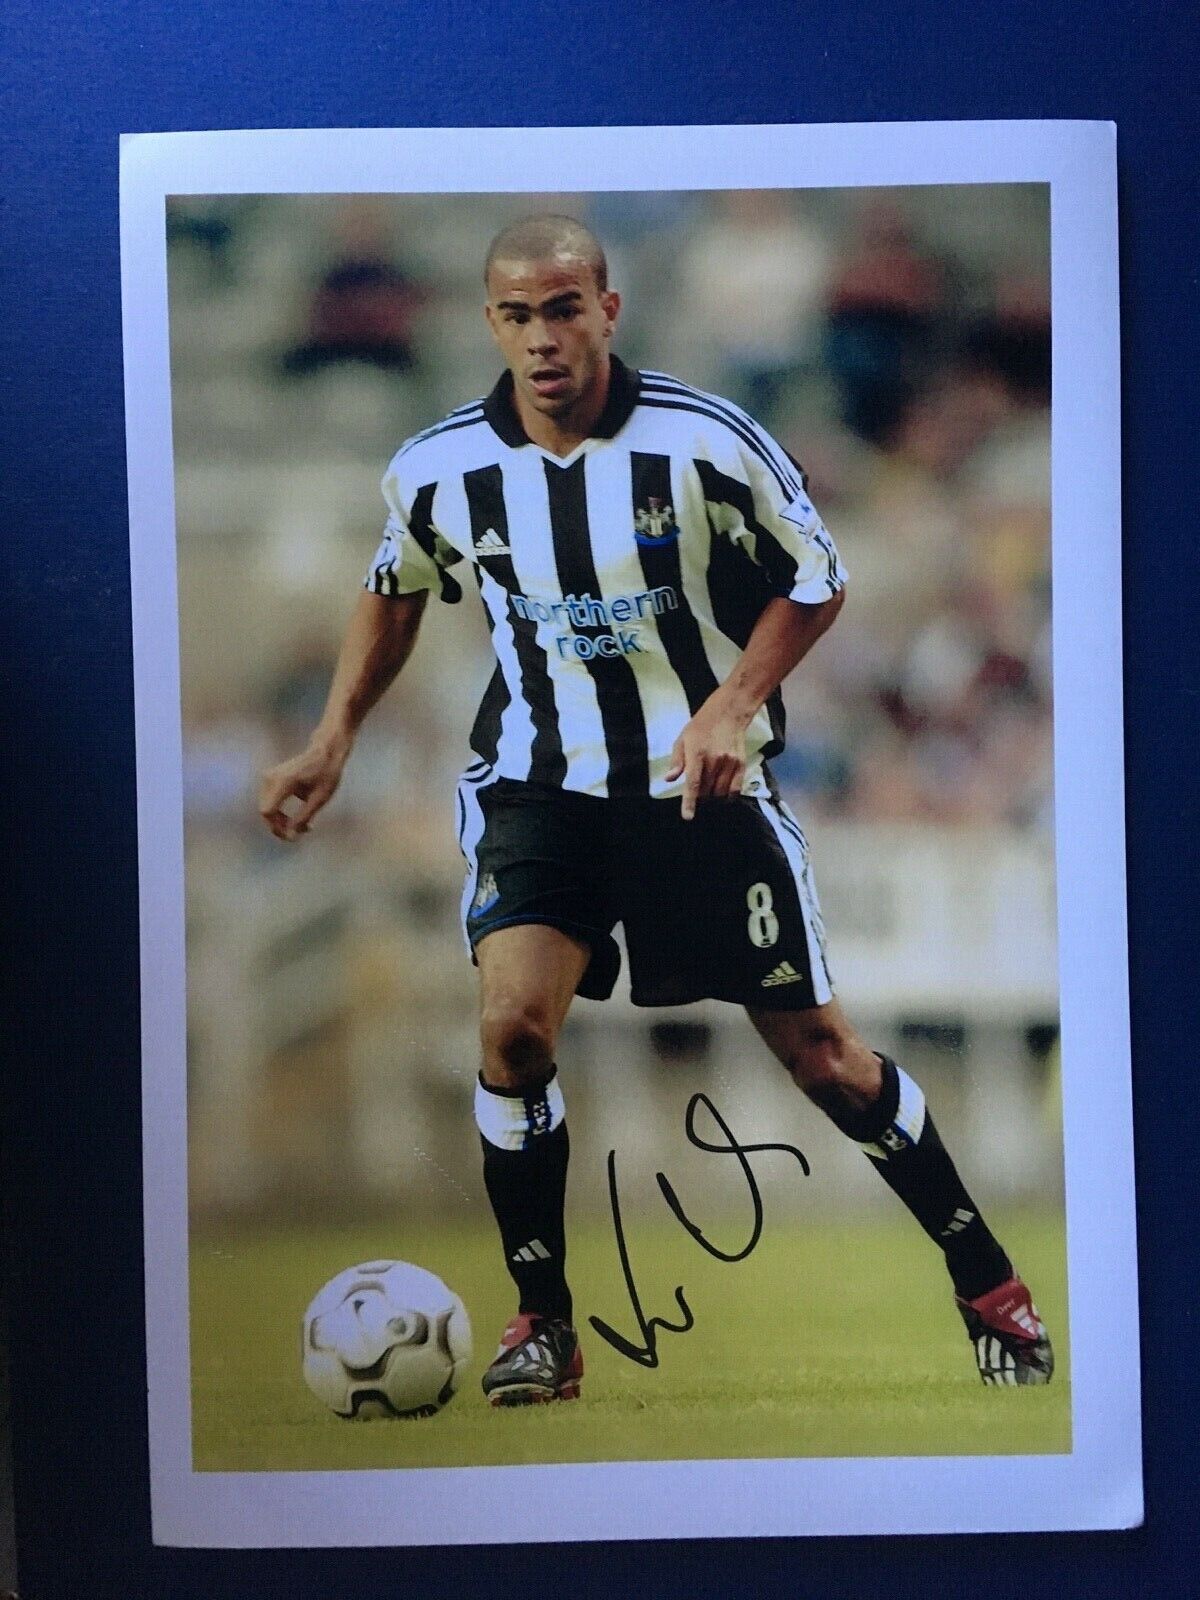 KEIRON DYER - FORMER NEWCASTLE FOOTBALLER - EXCELLENT SIGNED Photo Poster painting